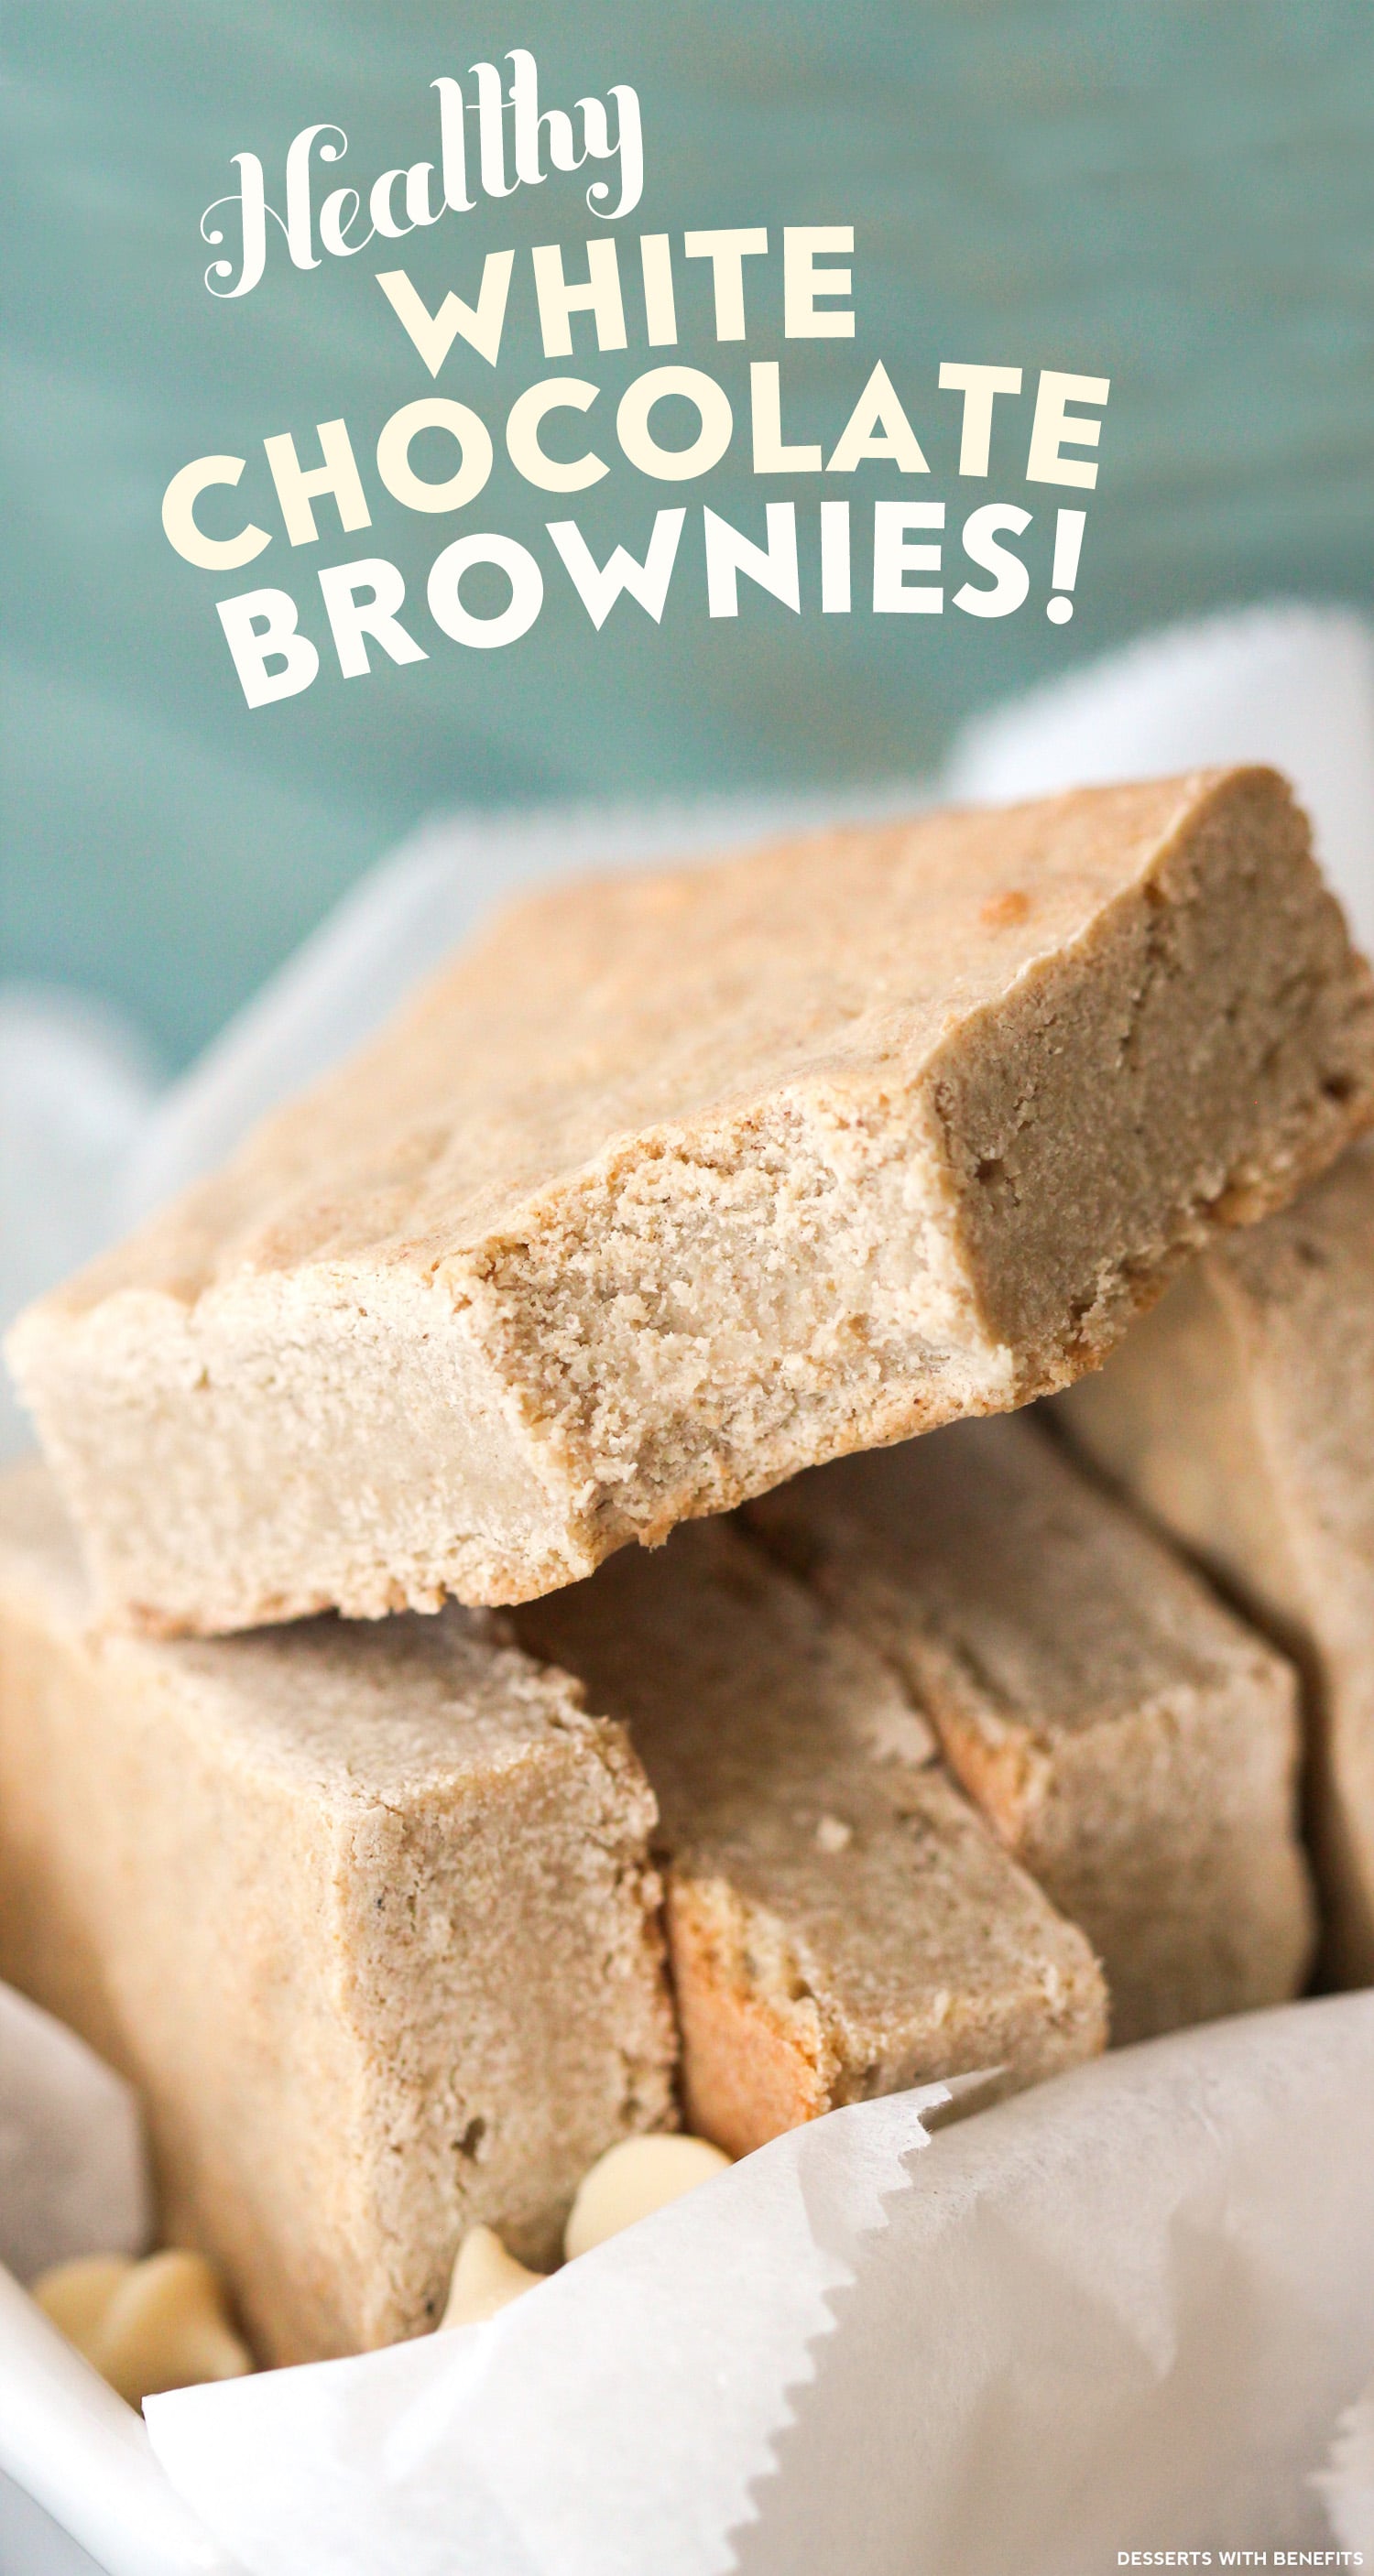 Healthy White Chocolate Brownies (sugar free, gluten free, dairy free, eggless, vegan) - Healthy Dessert Recipes at Desserts with Benefits